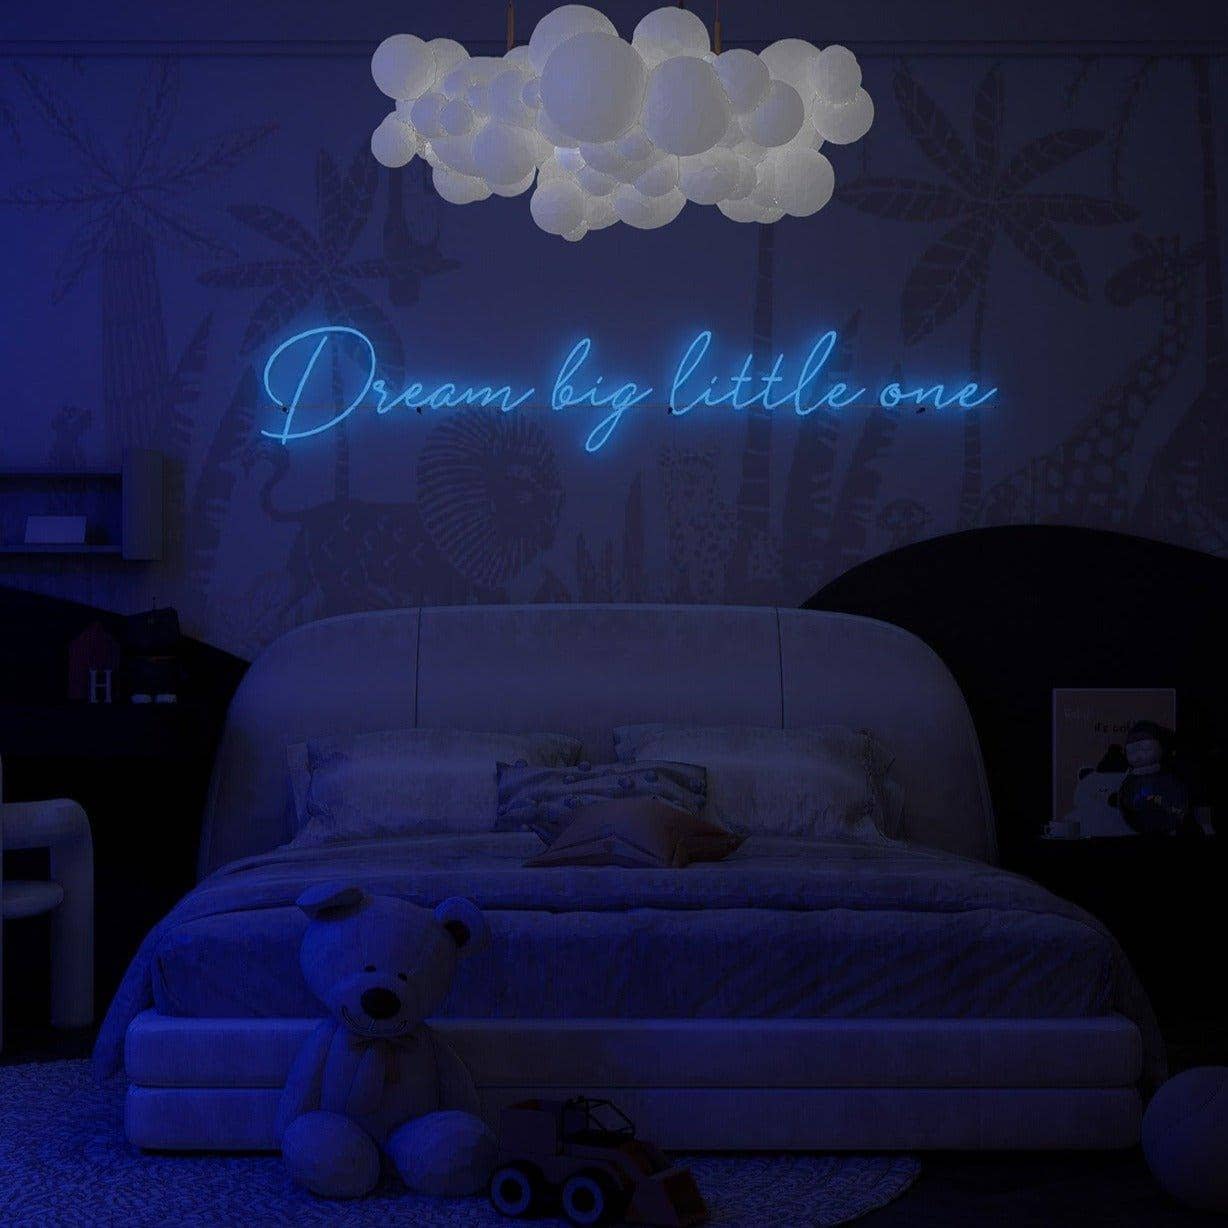 light-up-blue-neon-light-size-chart-at-night-for-display-in-the-bedroom-dream-big-little-one